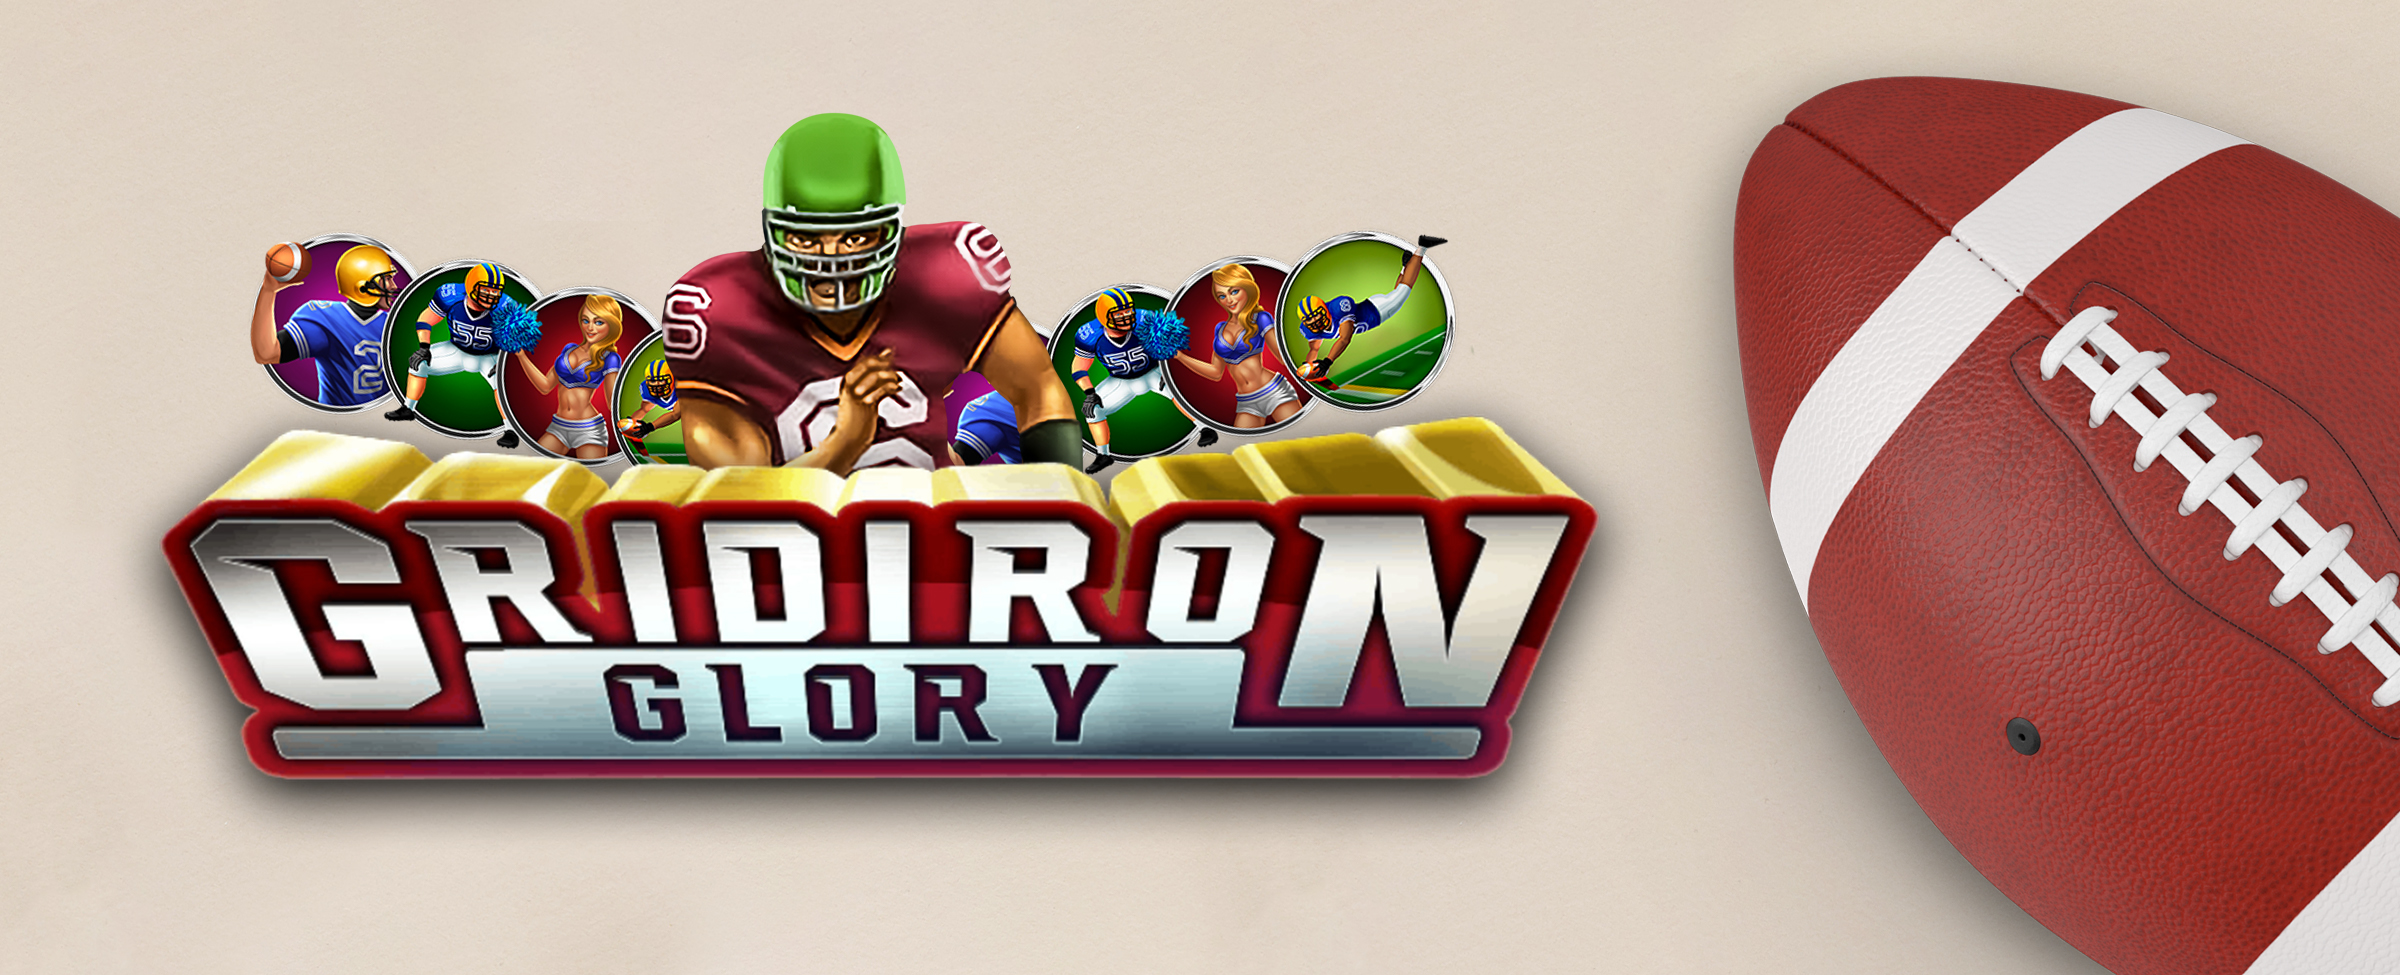 The logo from the Cafe Casino slot game, Gridiron Glory, is shown prominently in the image, hovering atop an off-white table surface. To its right, coming out of the screen is a football.